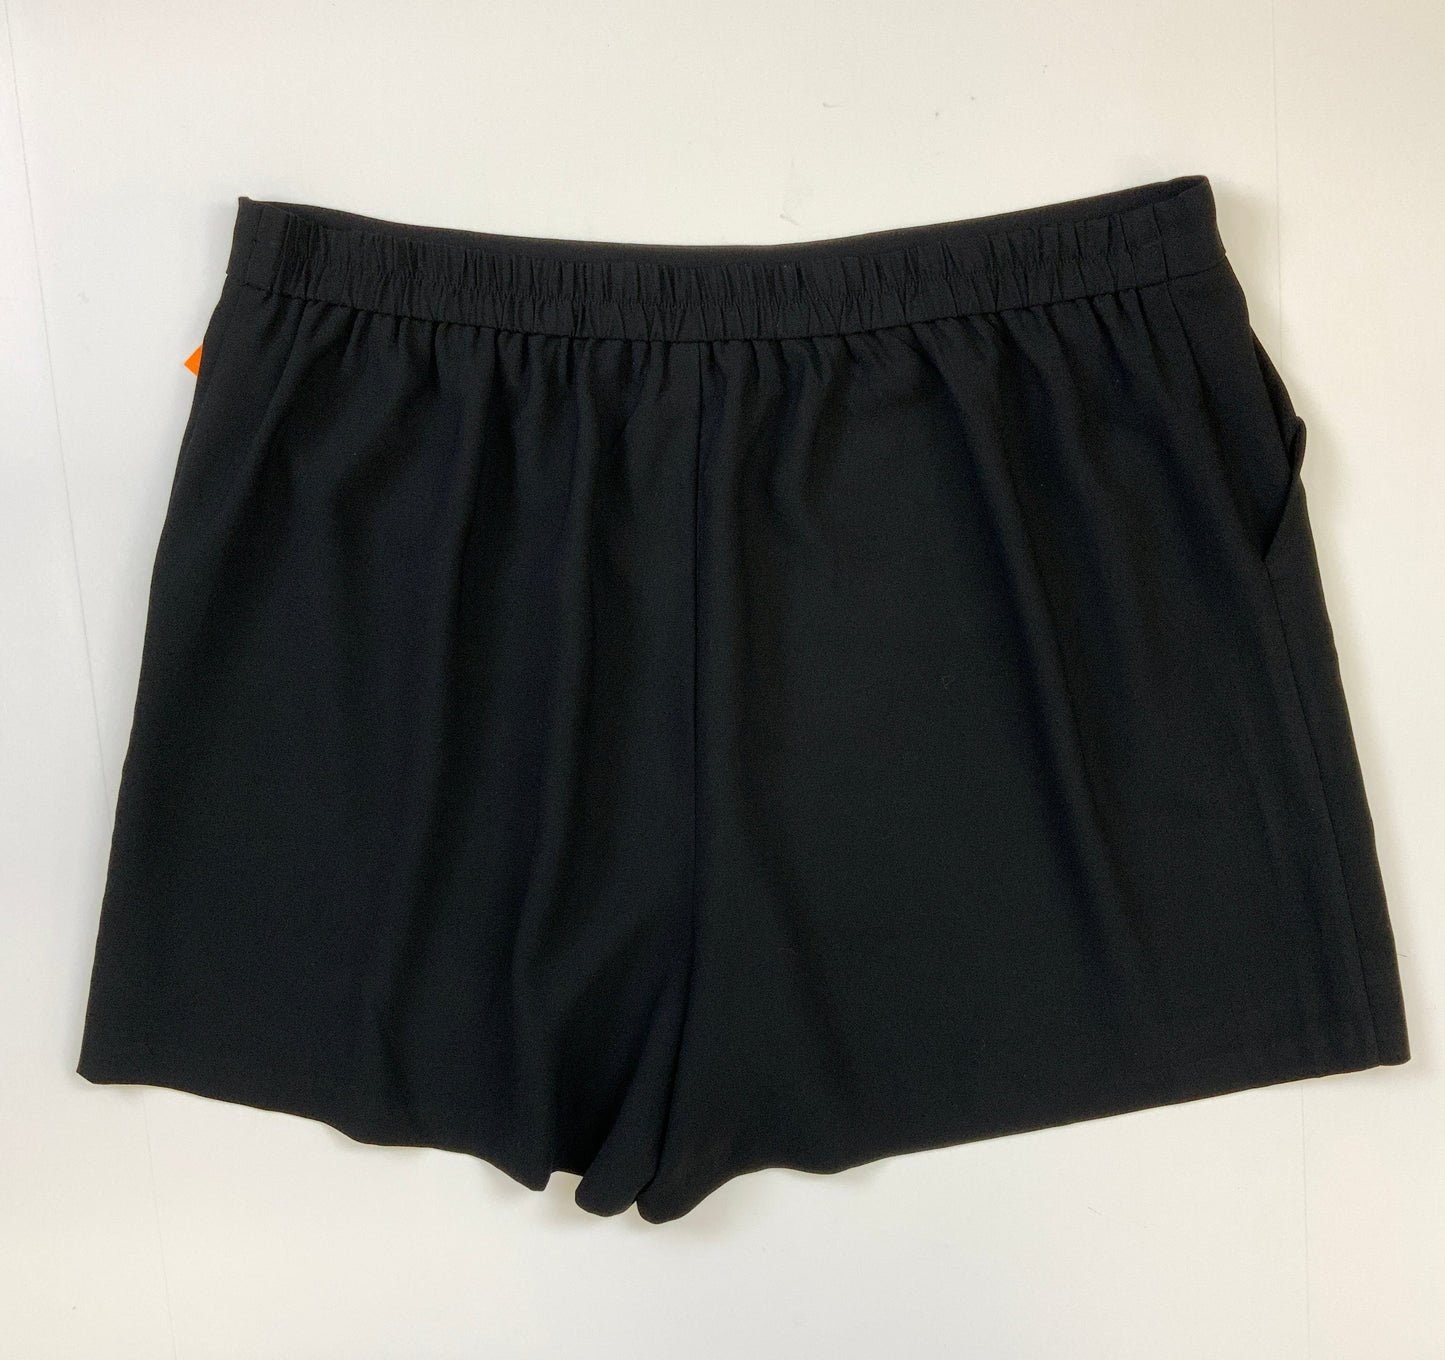 Black Shorts Skies Are Blue, Size 1x